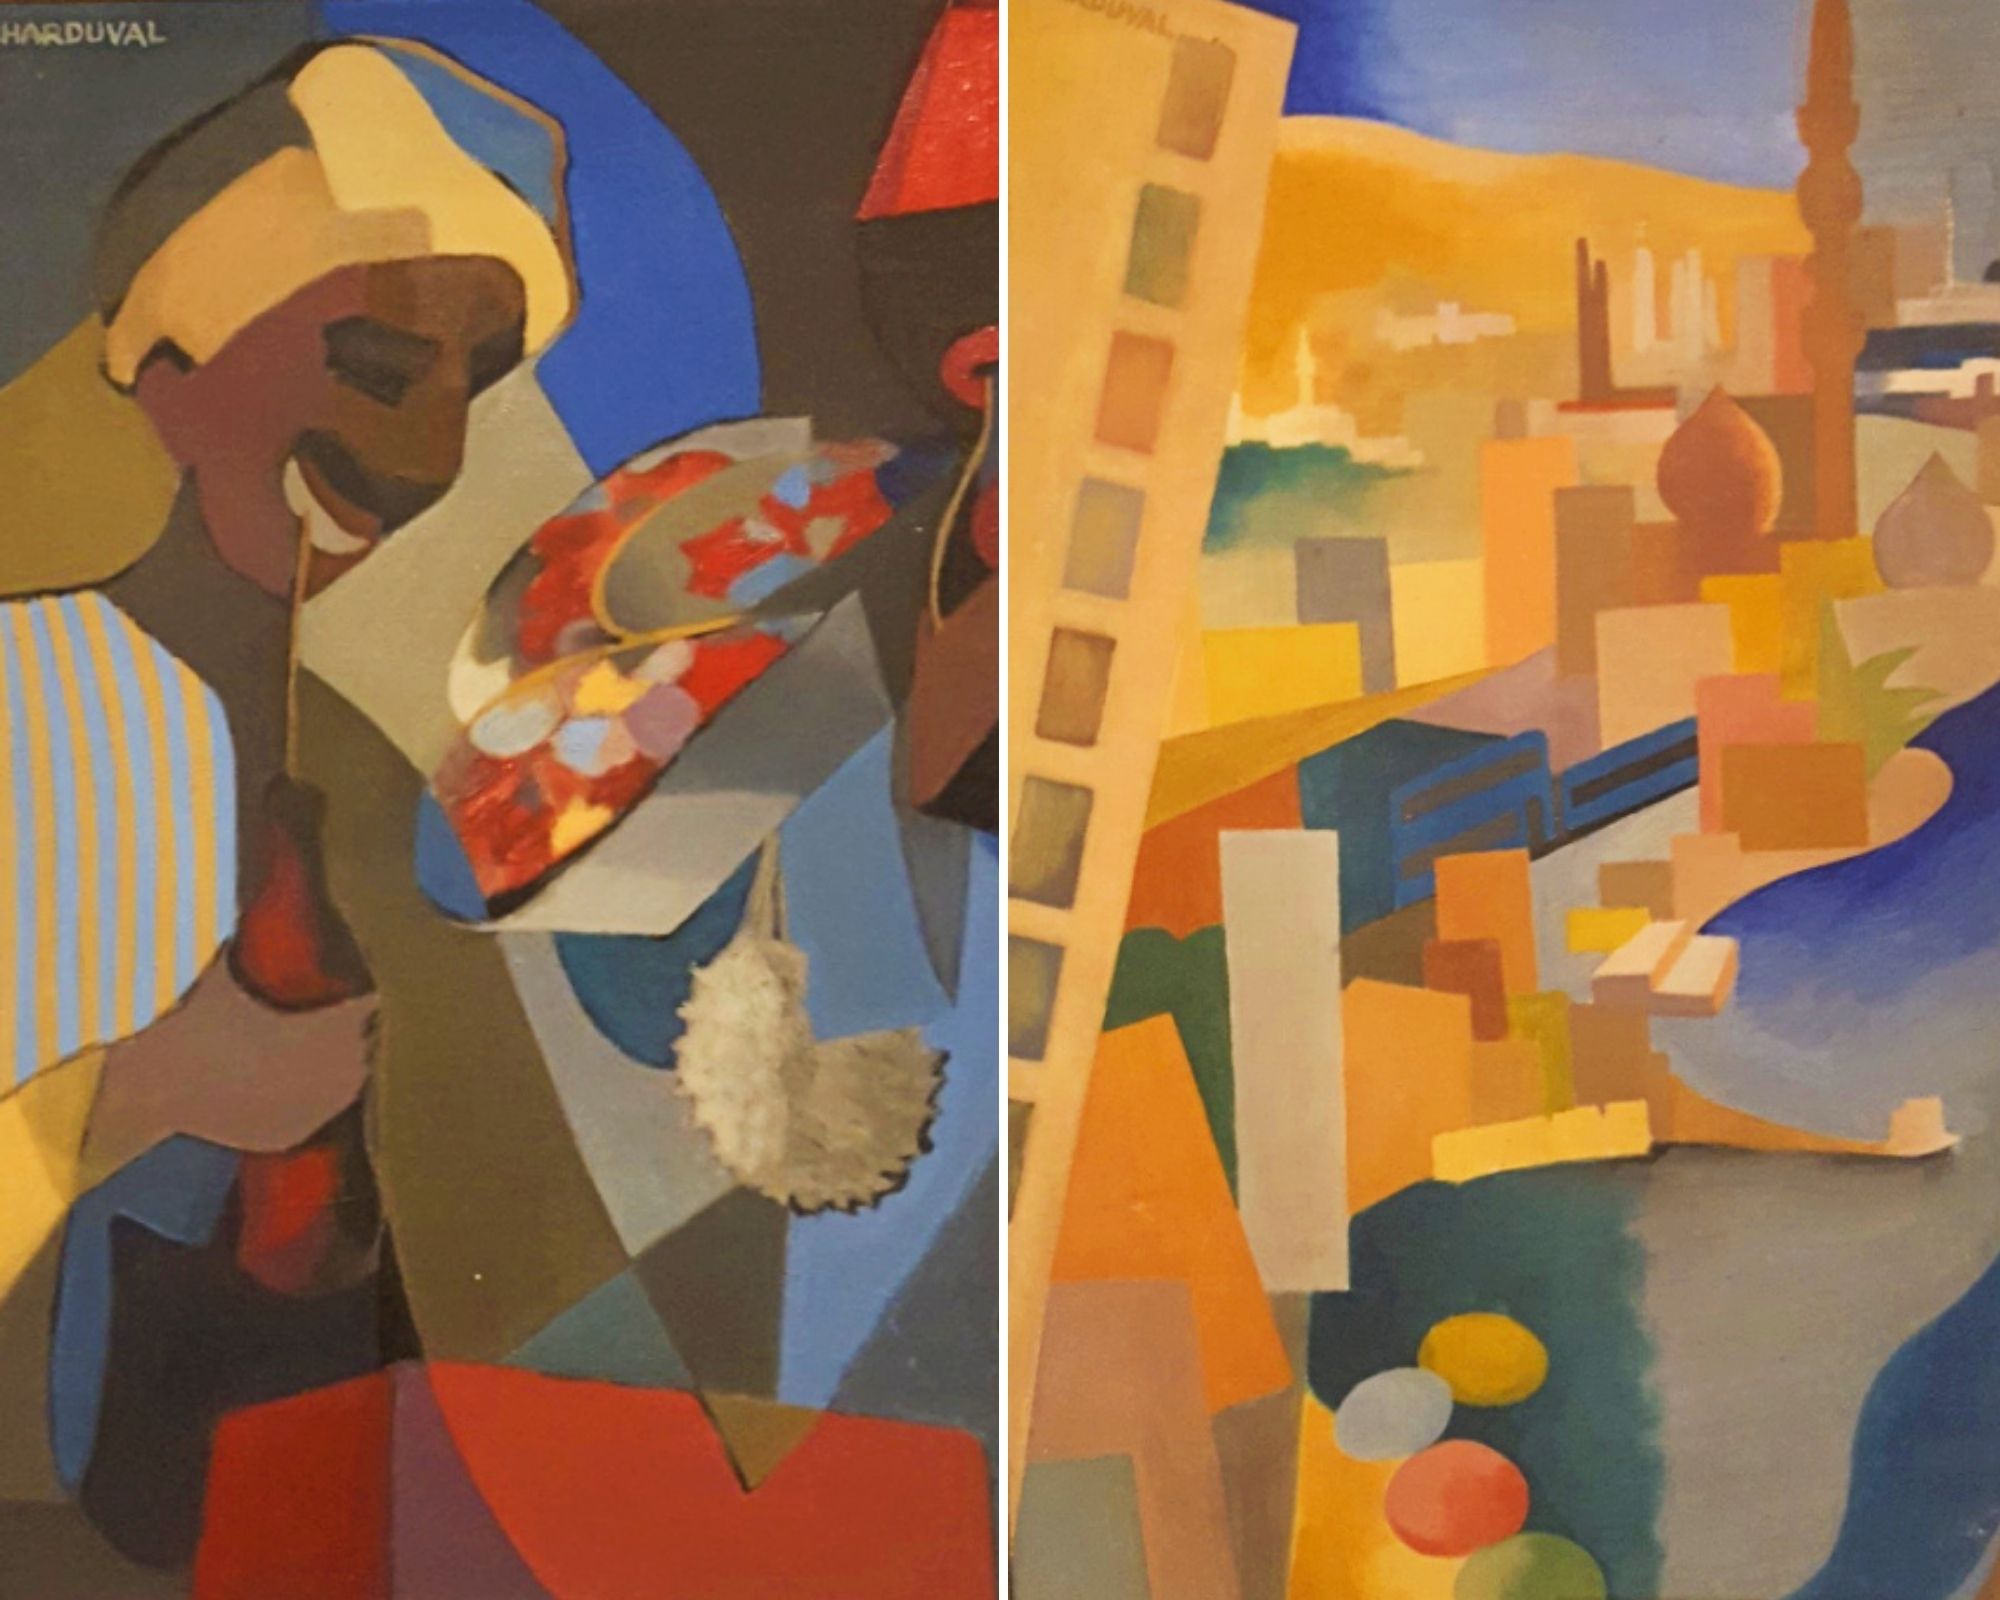 Ex-Israeli journalist Daniel Putterman identified the two paintings above as Charduval’s